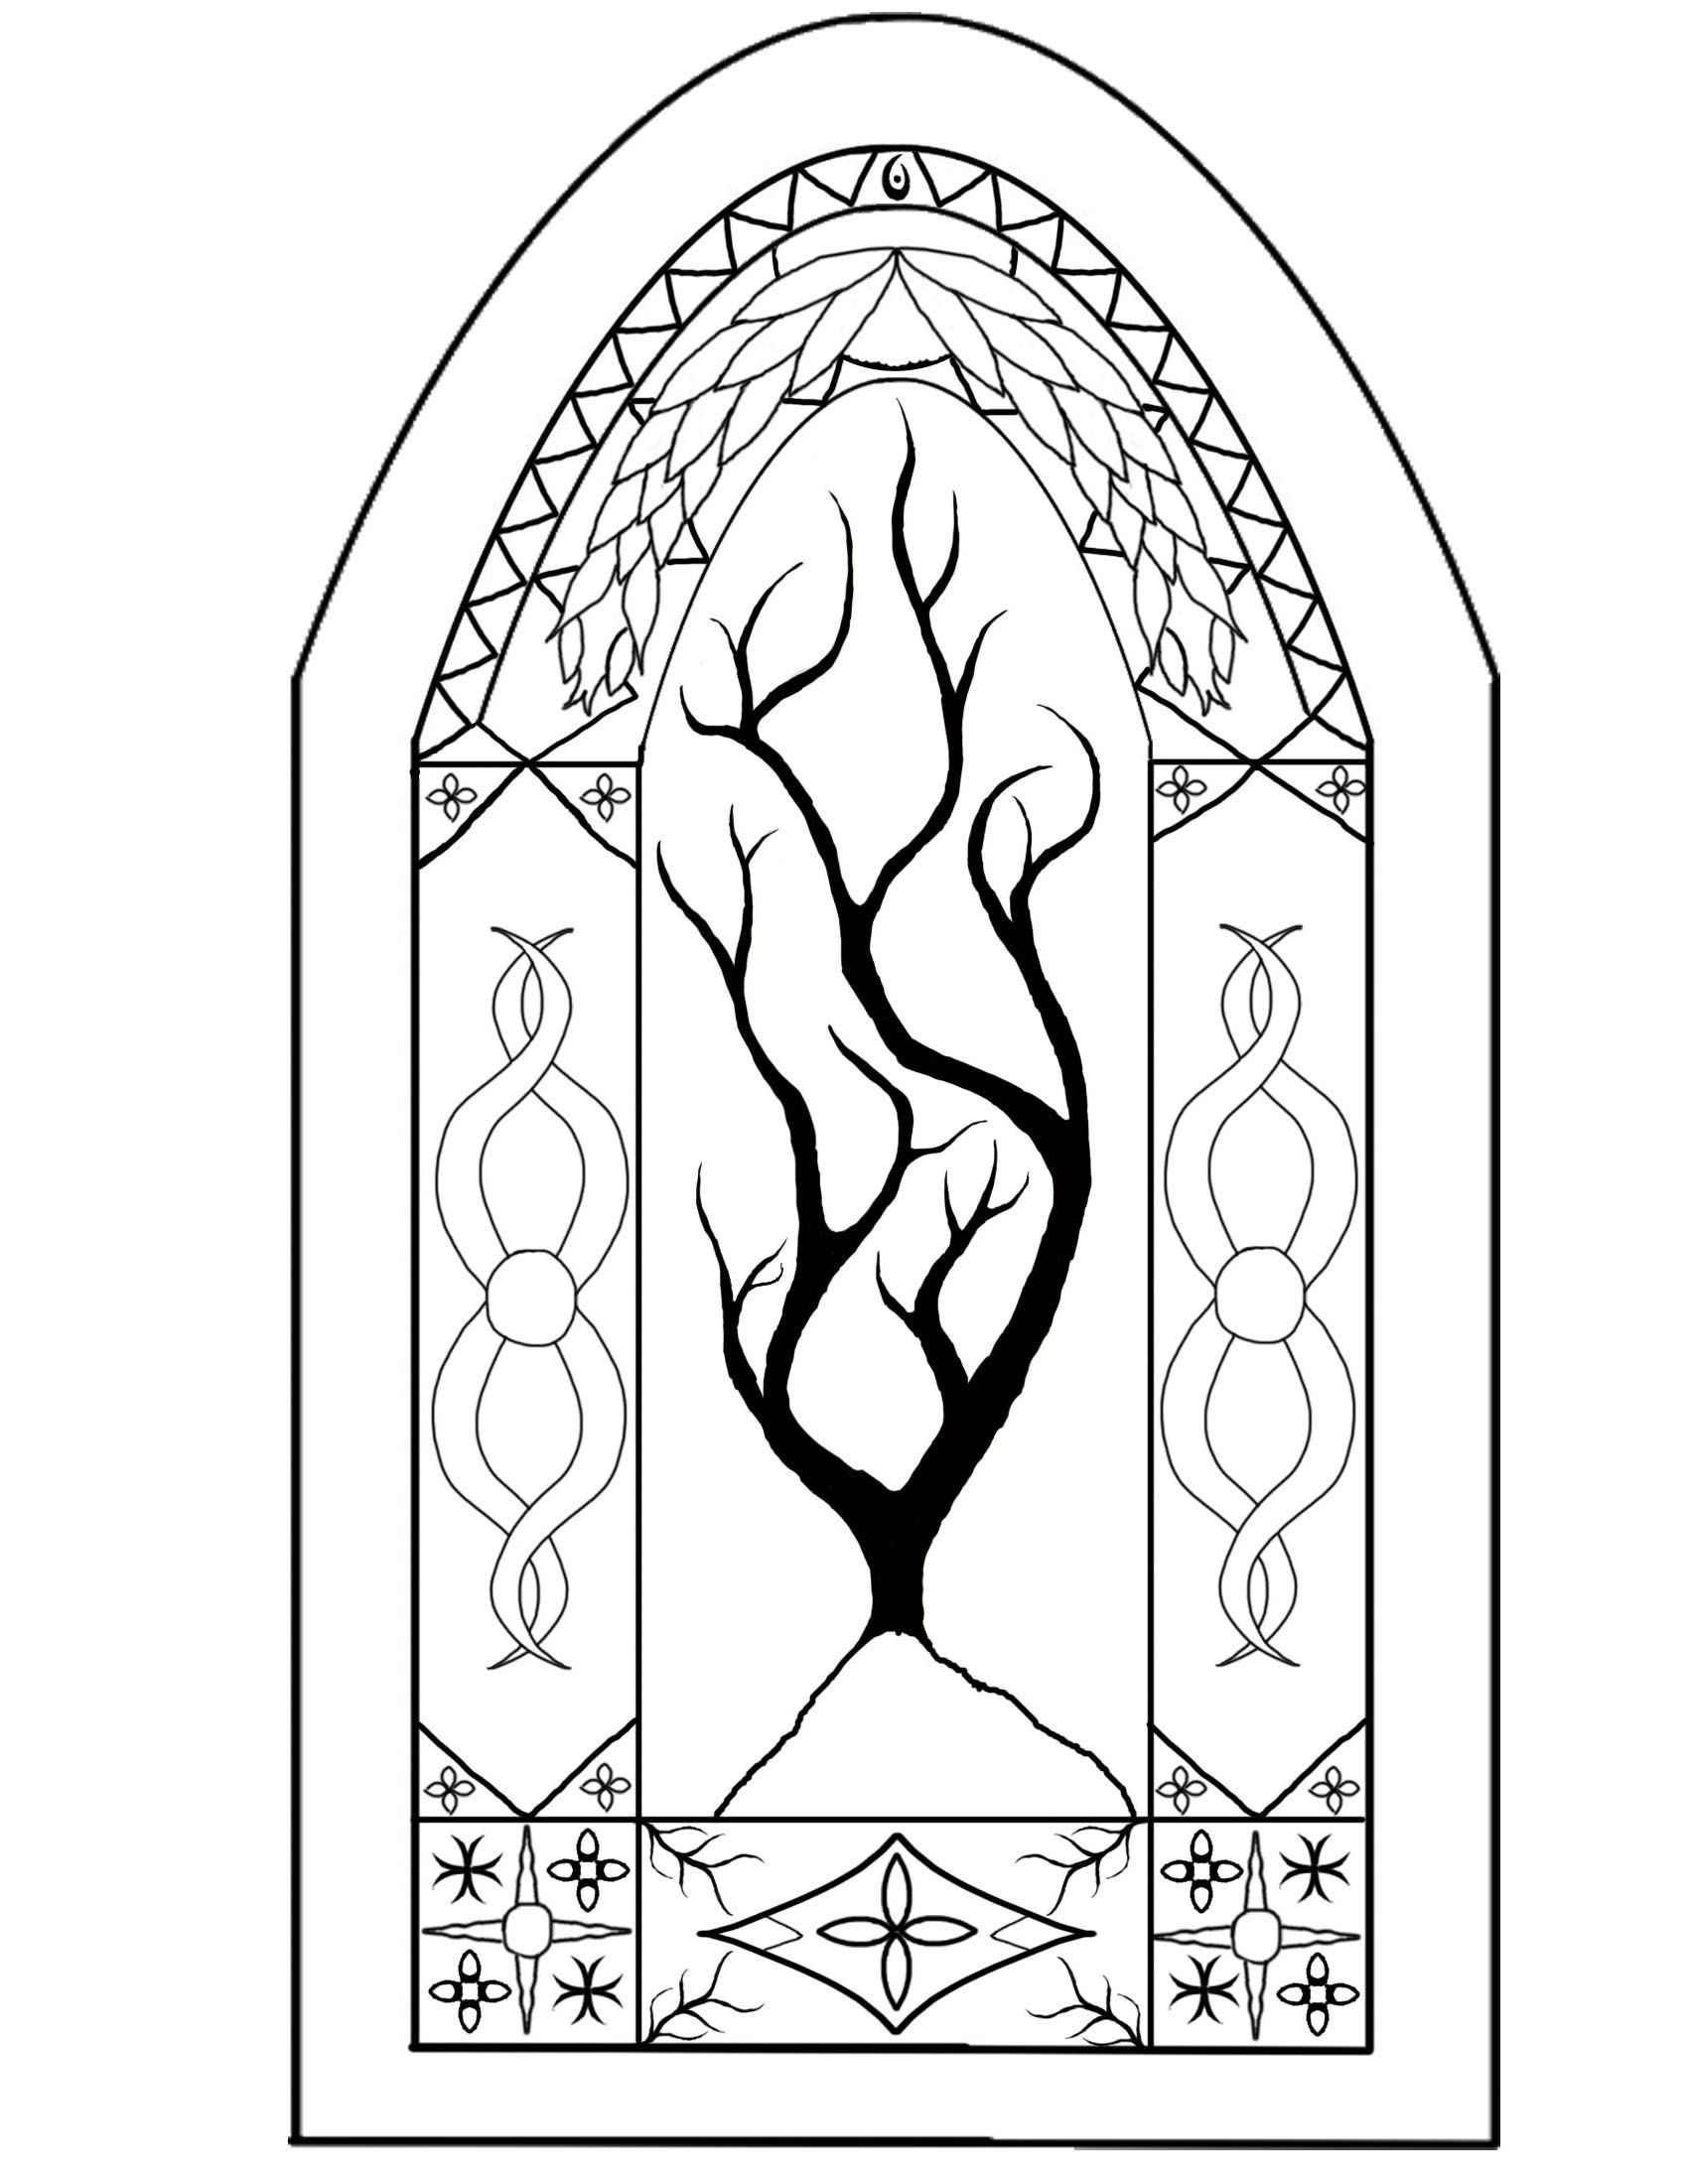 Mosaic Stained Glass Coloring Page Free Printable Coloring Pages | My ...